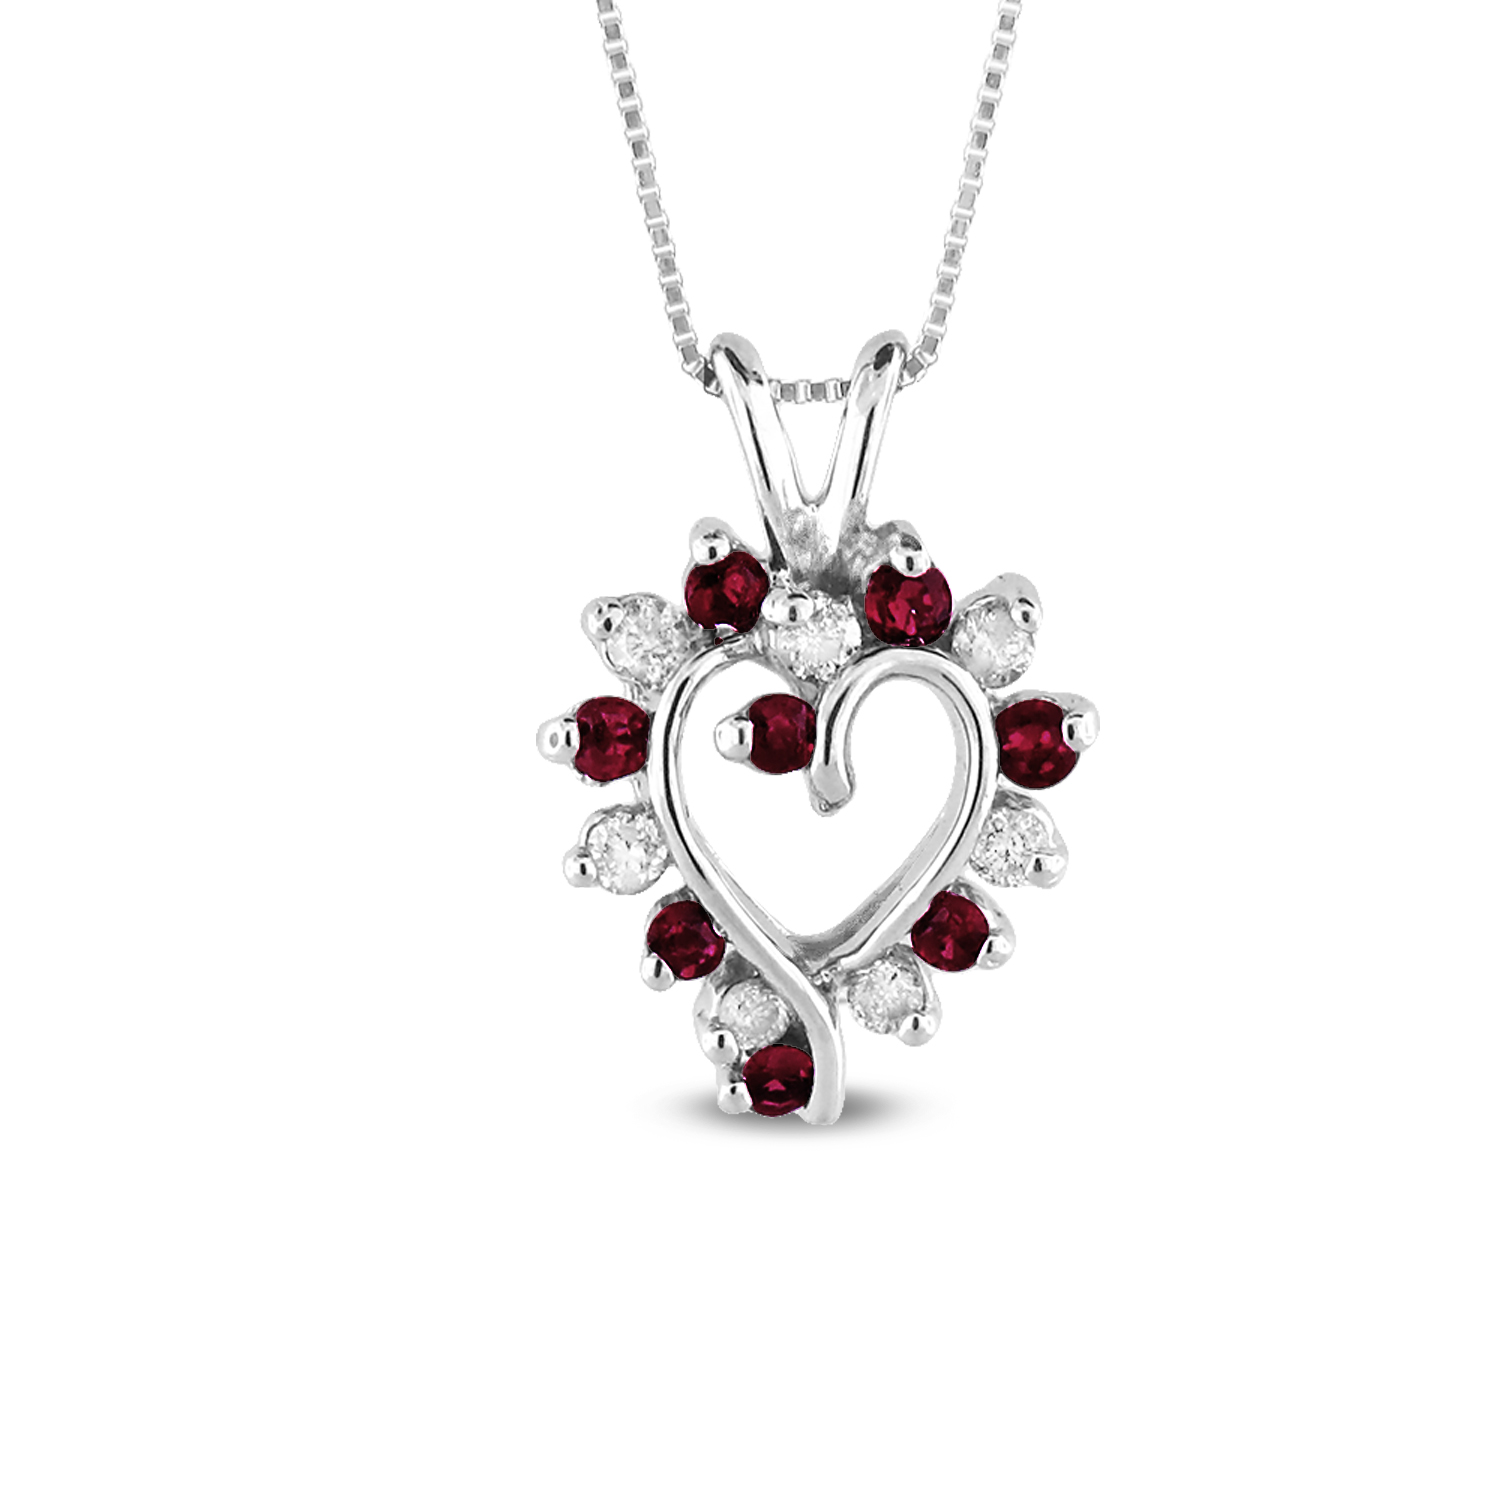 View 0.45cttw Diamond and Ruby Heart Pendant set in 14k Gold